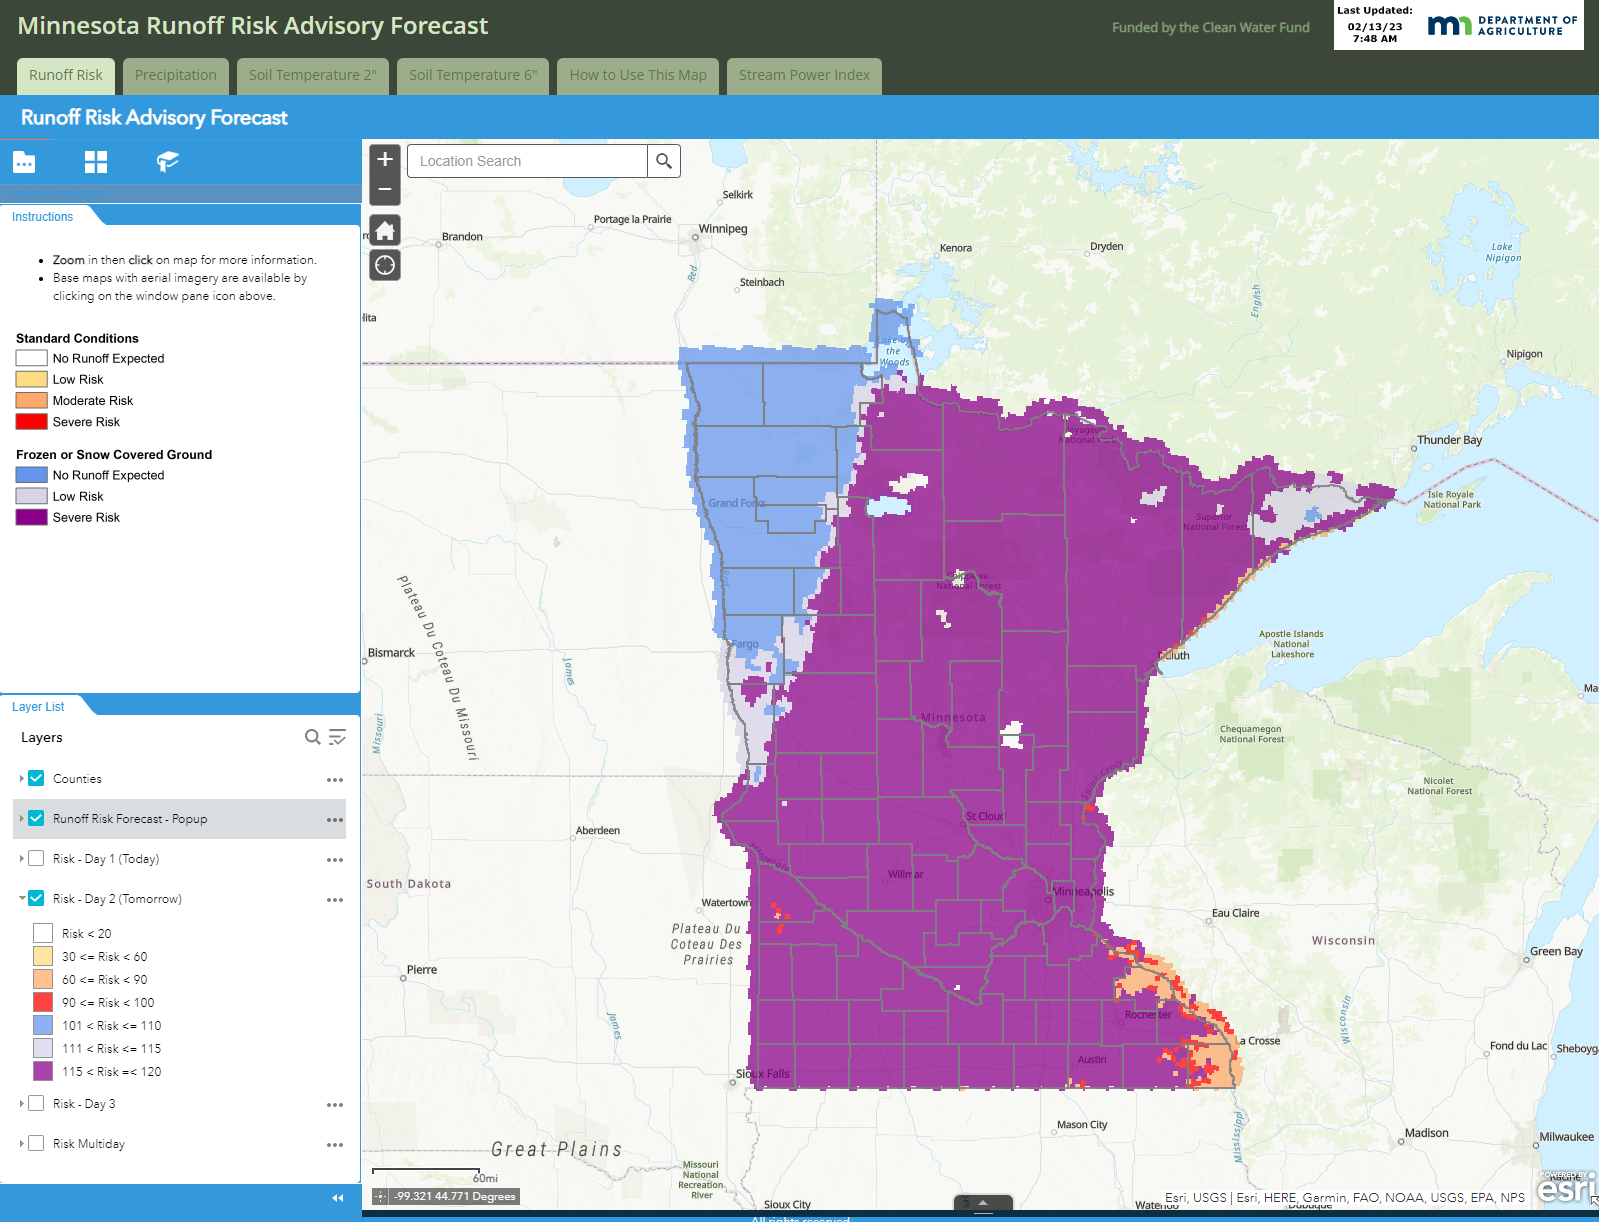 Minnesota Runoff Risk tool hosted by the Minnesota Department of Agriculture